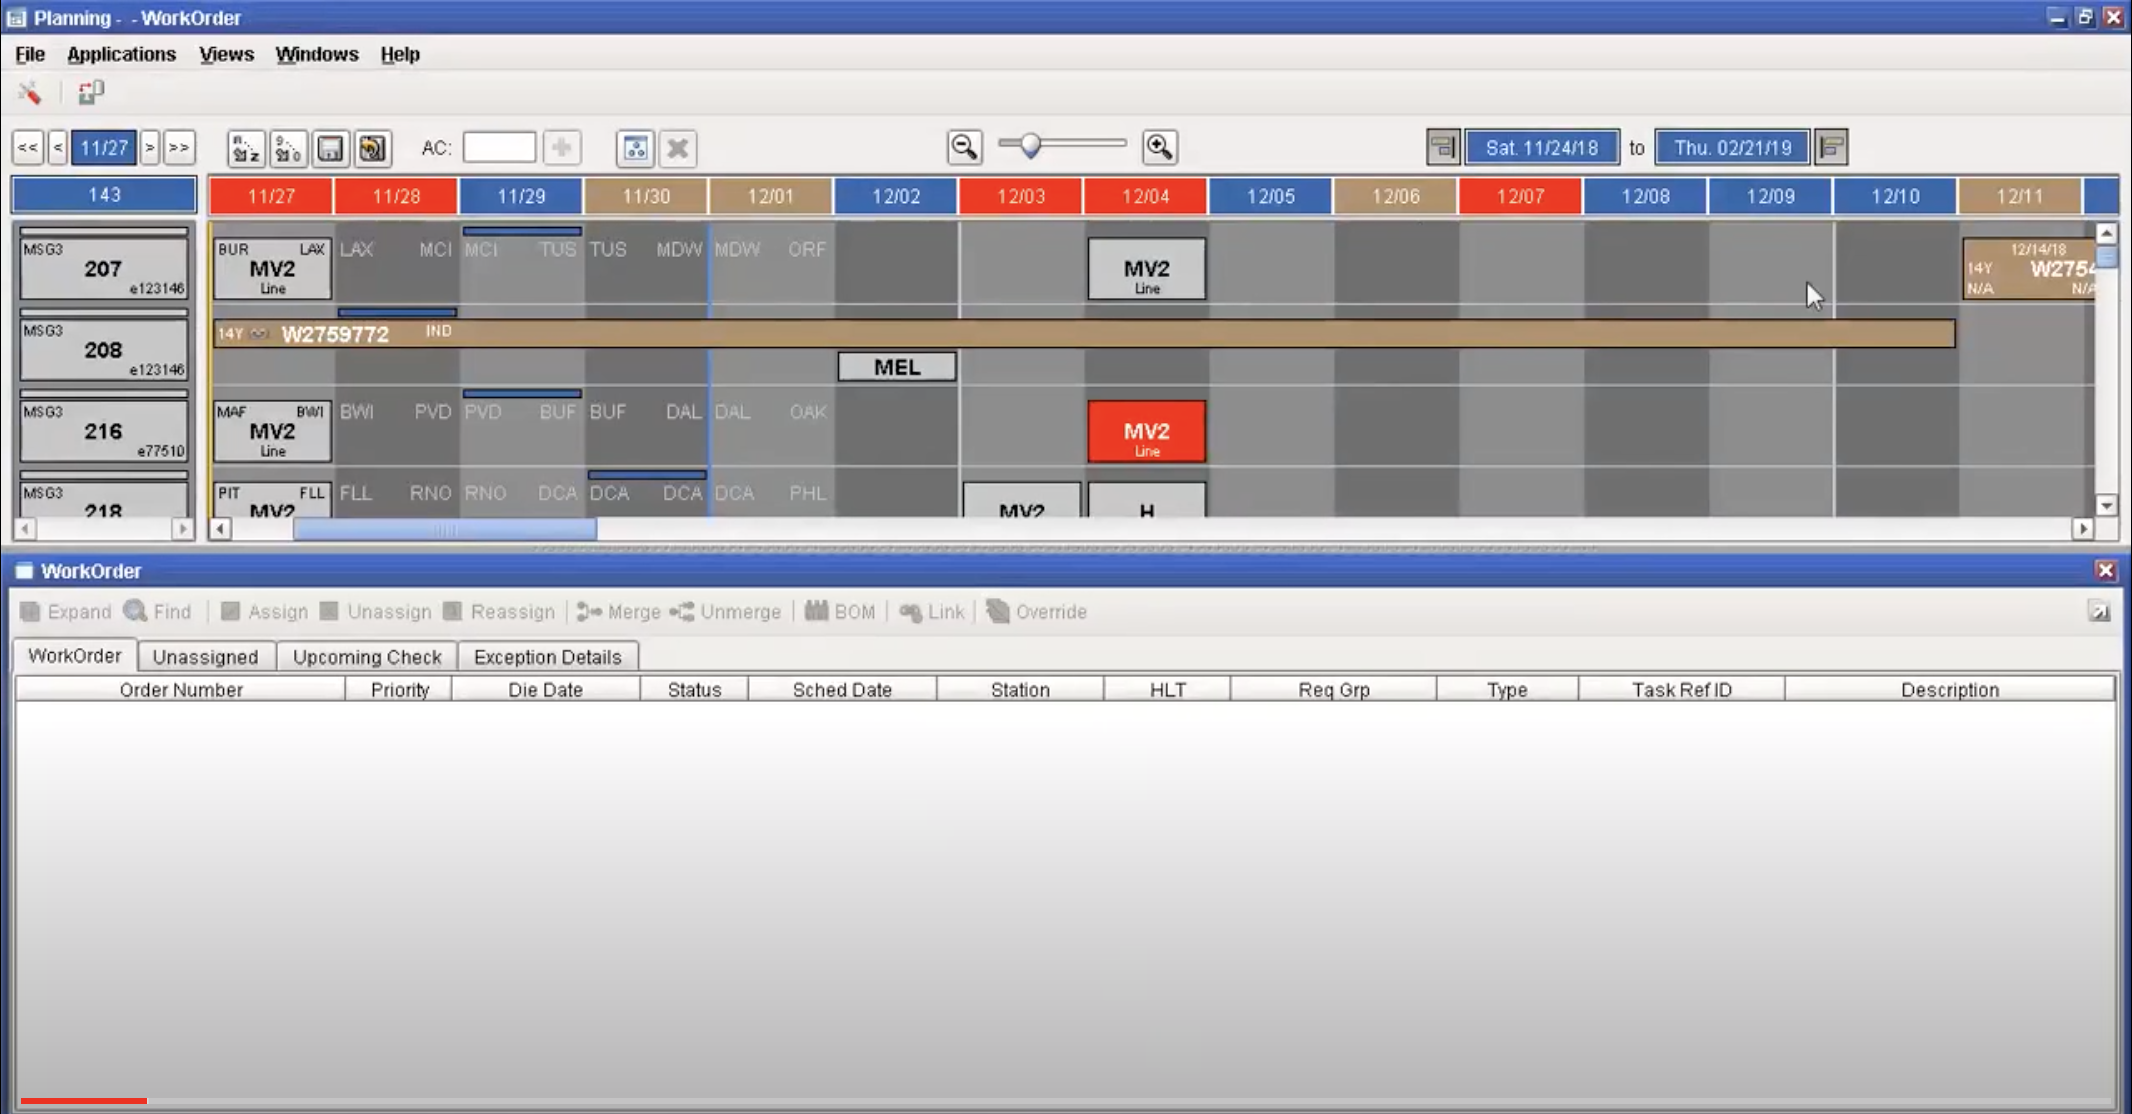 User interface of legacy line planner system